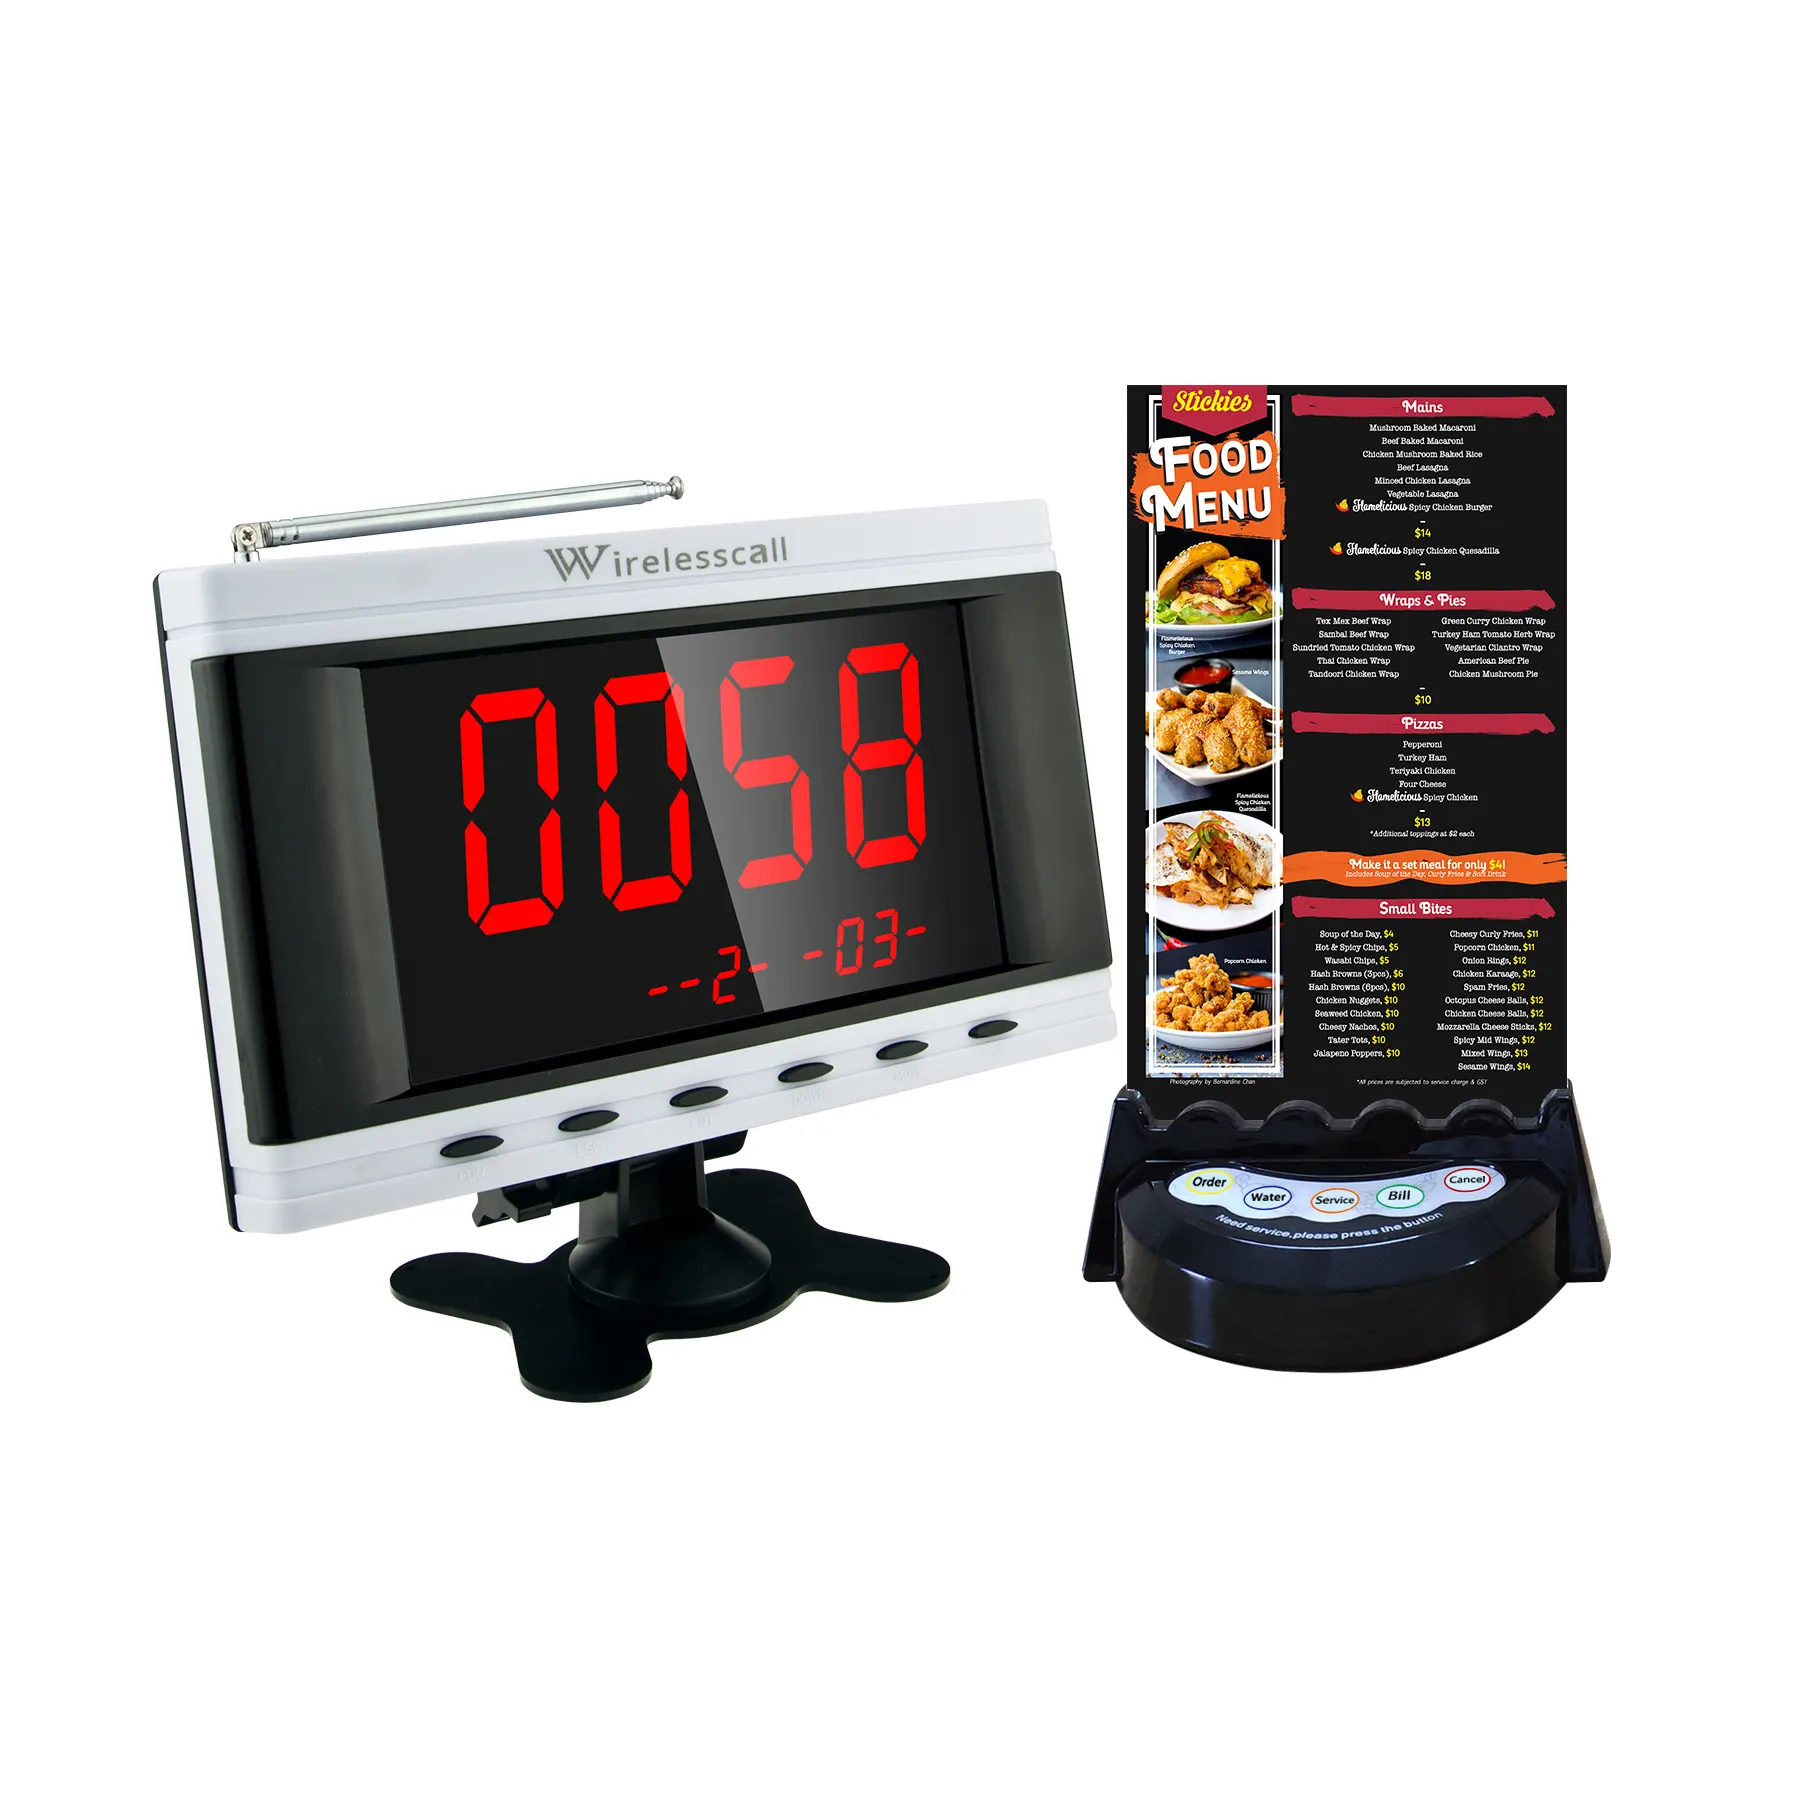 Wireless Calling system with 10 pagers and OEM menu